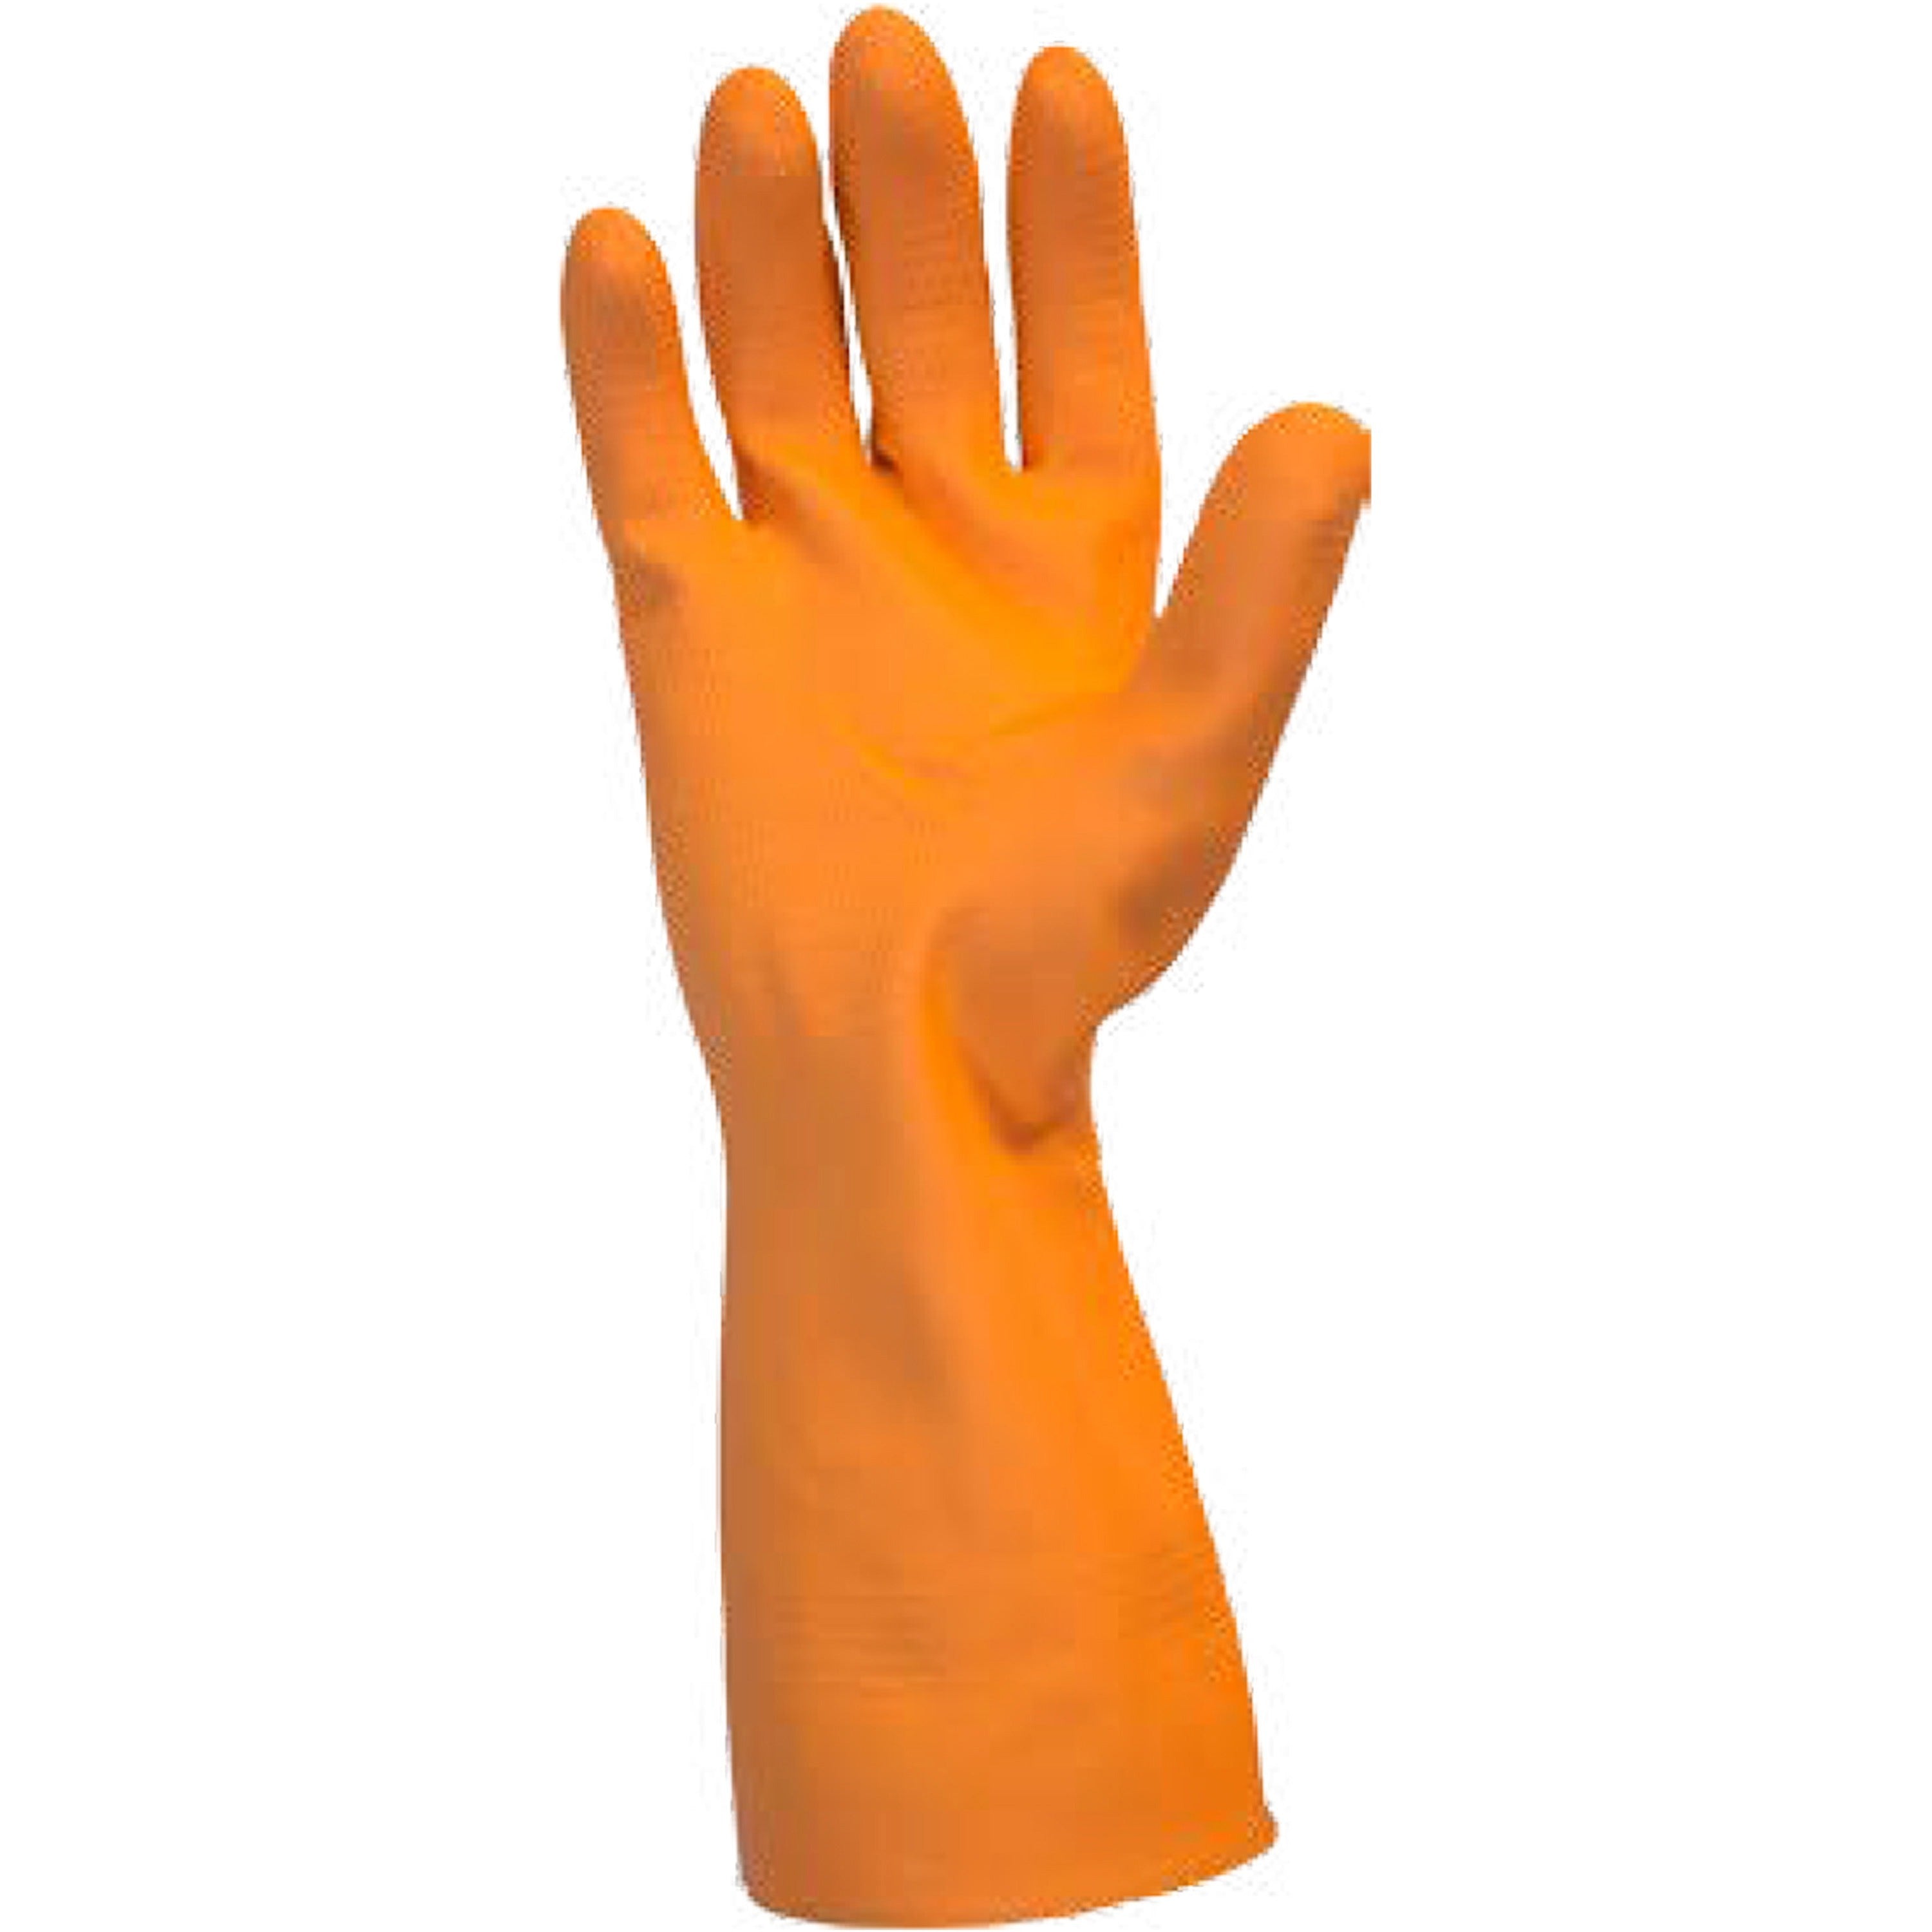 Safety Zone Orange Neoprene Latex Blend Flock Lined Latex Gloves - Chemical Protection - X-Large Size - Orange - Fish Scale Grip, Flock-lined - For Dishwashing, Cleaning, Meat Processing - 28 mil Thickness - 12" Glove Length